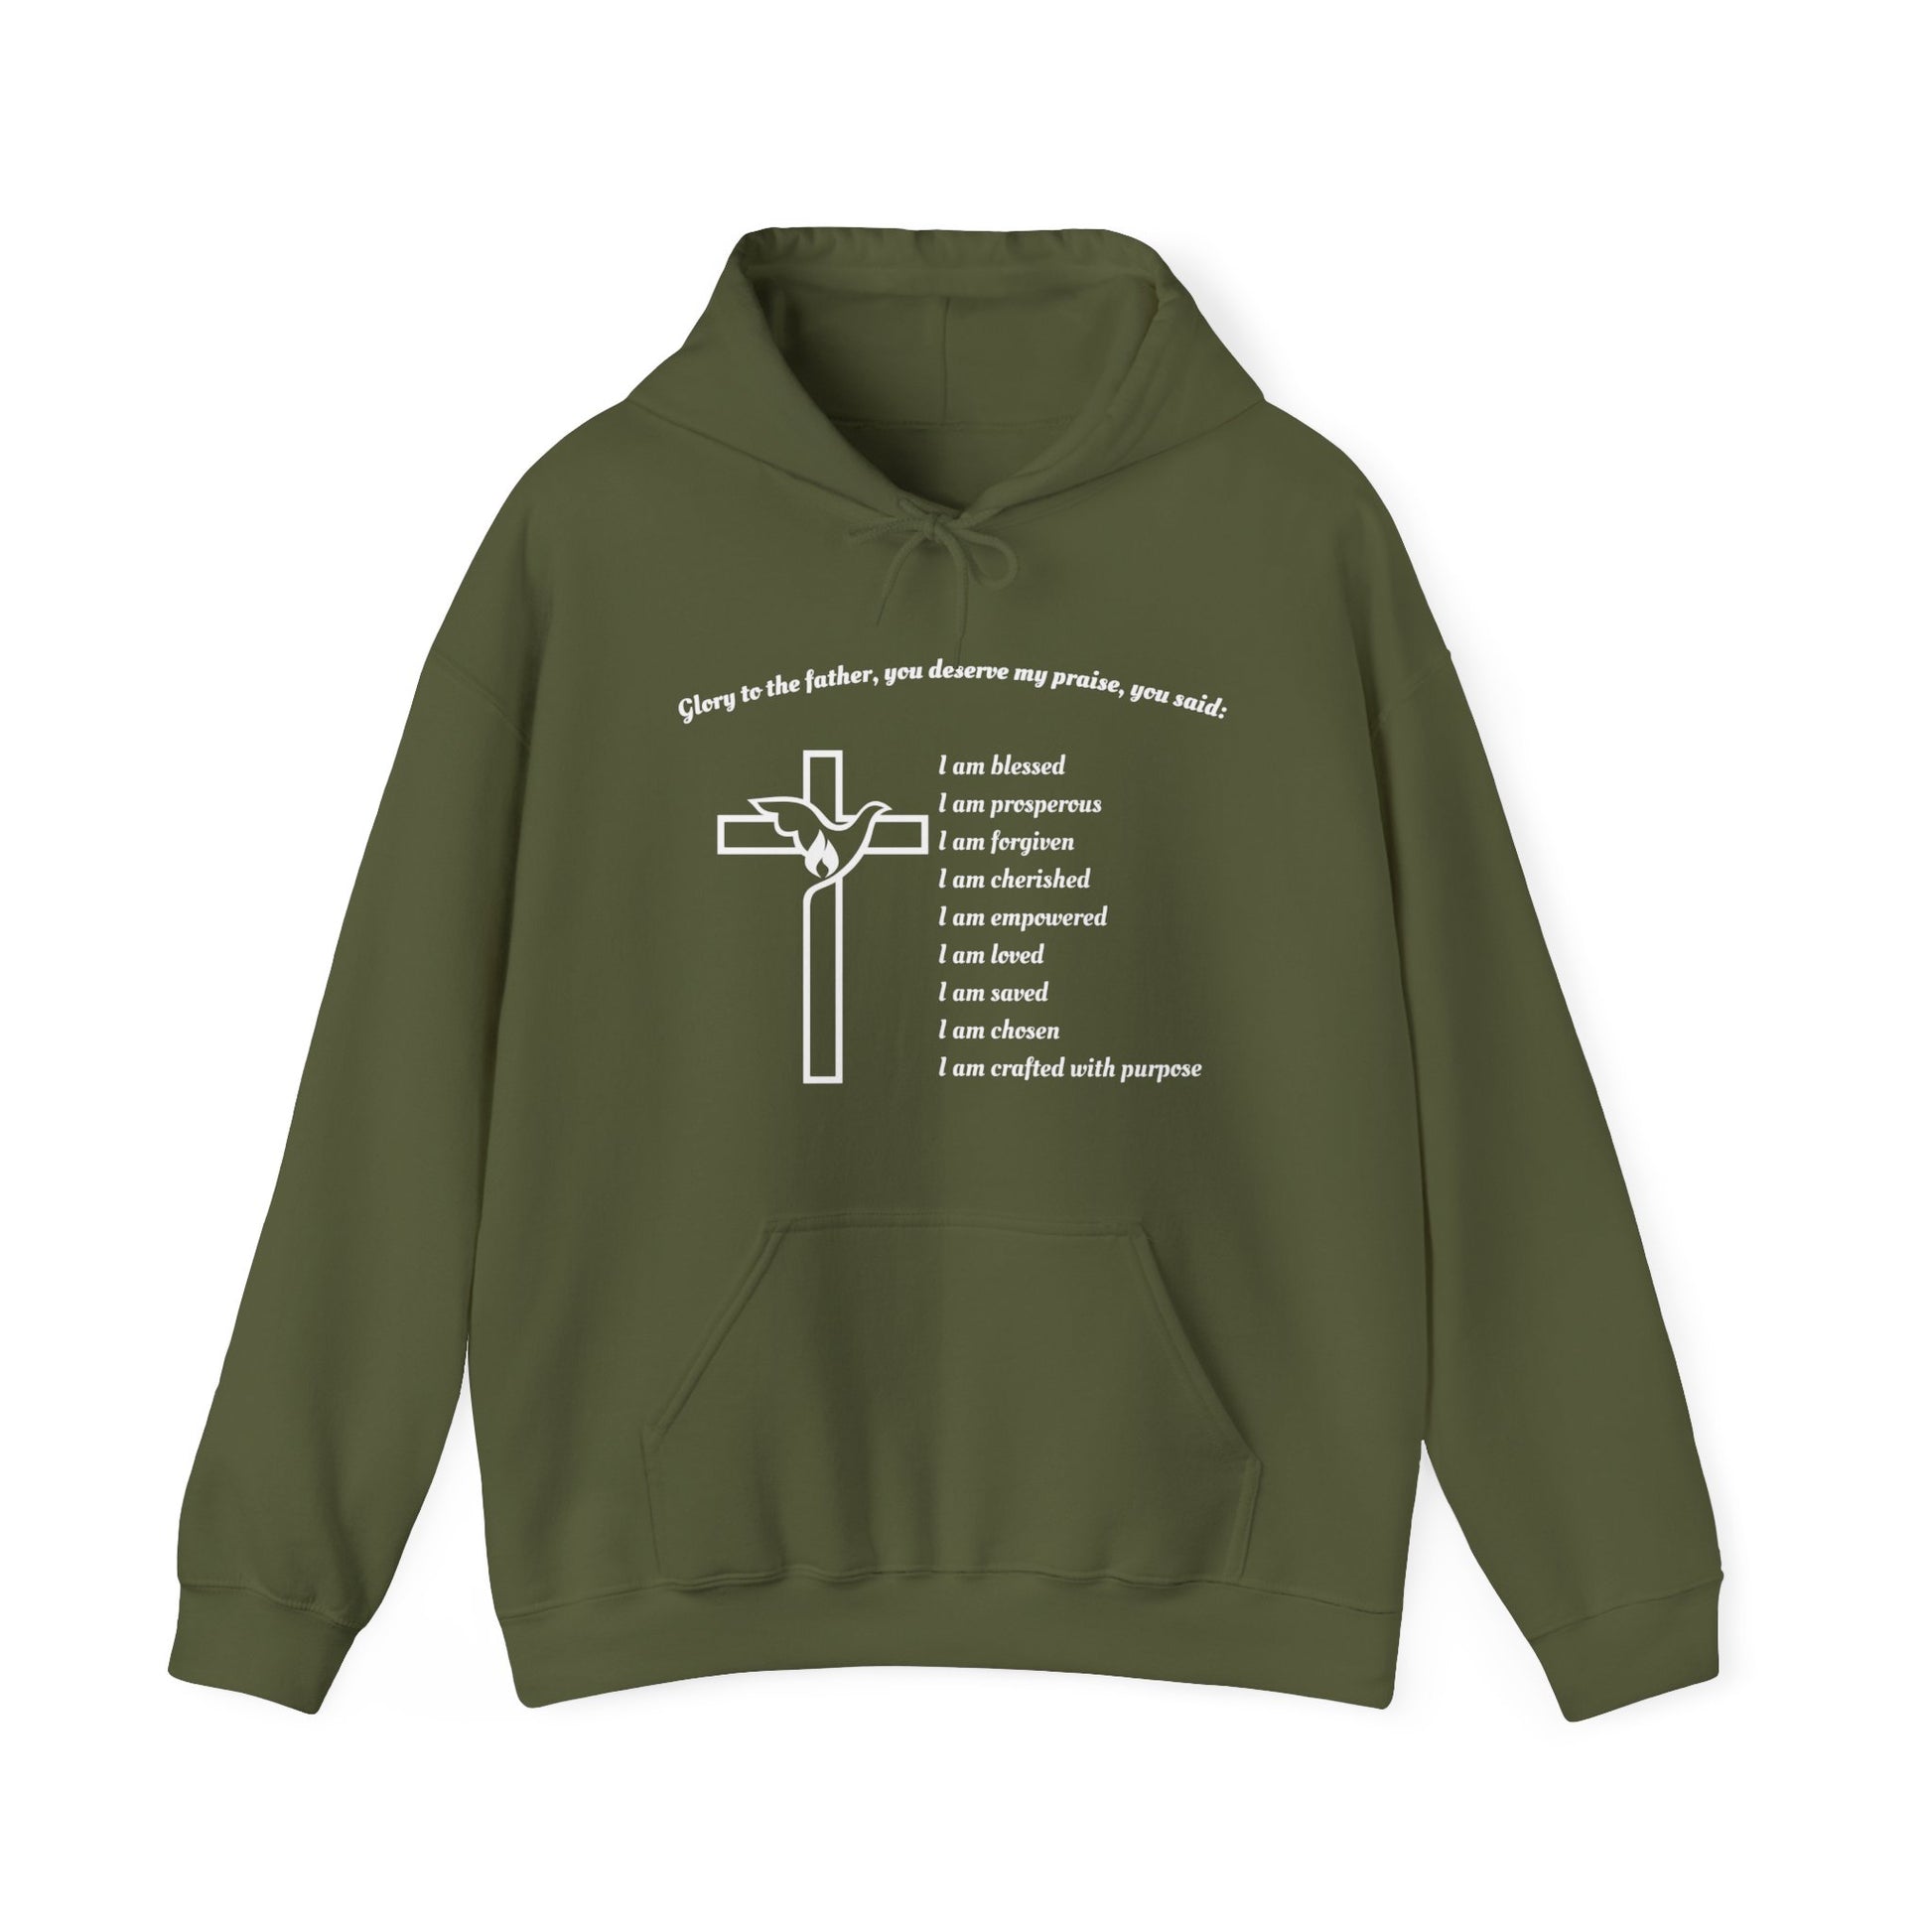 I am Glory to the Father Hooded Sweatshirt Unisex Cozy Heavy Blend49